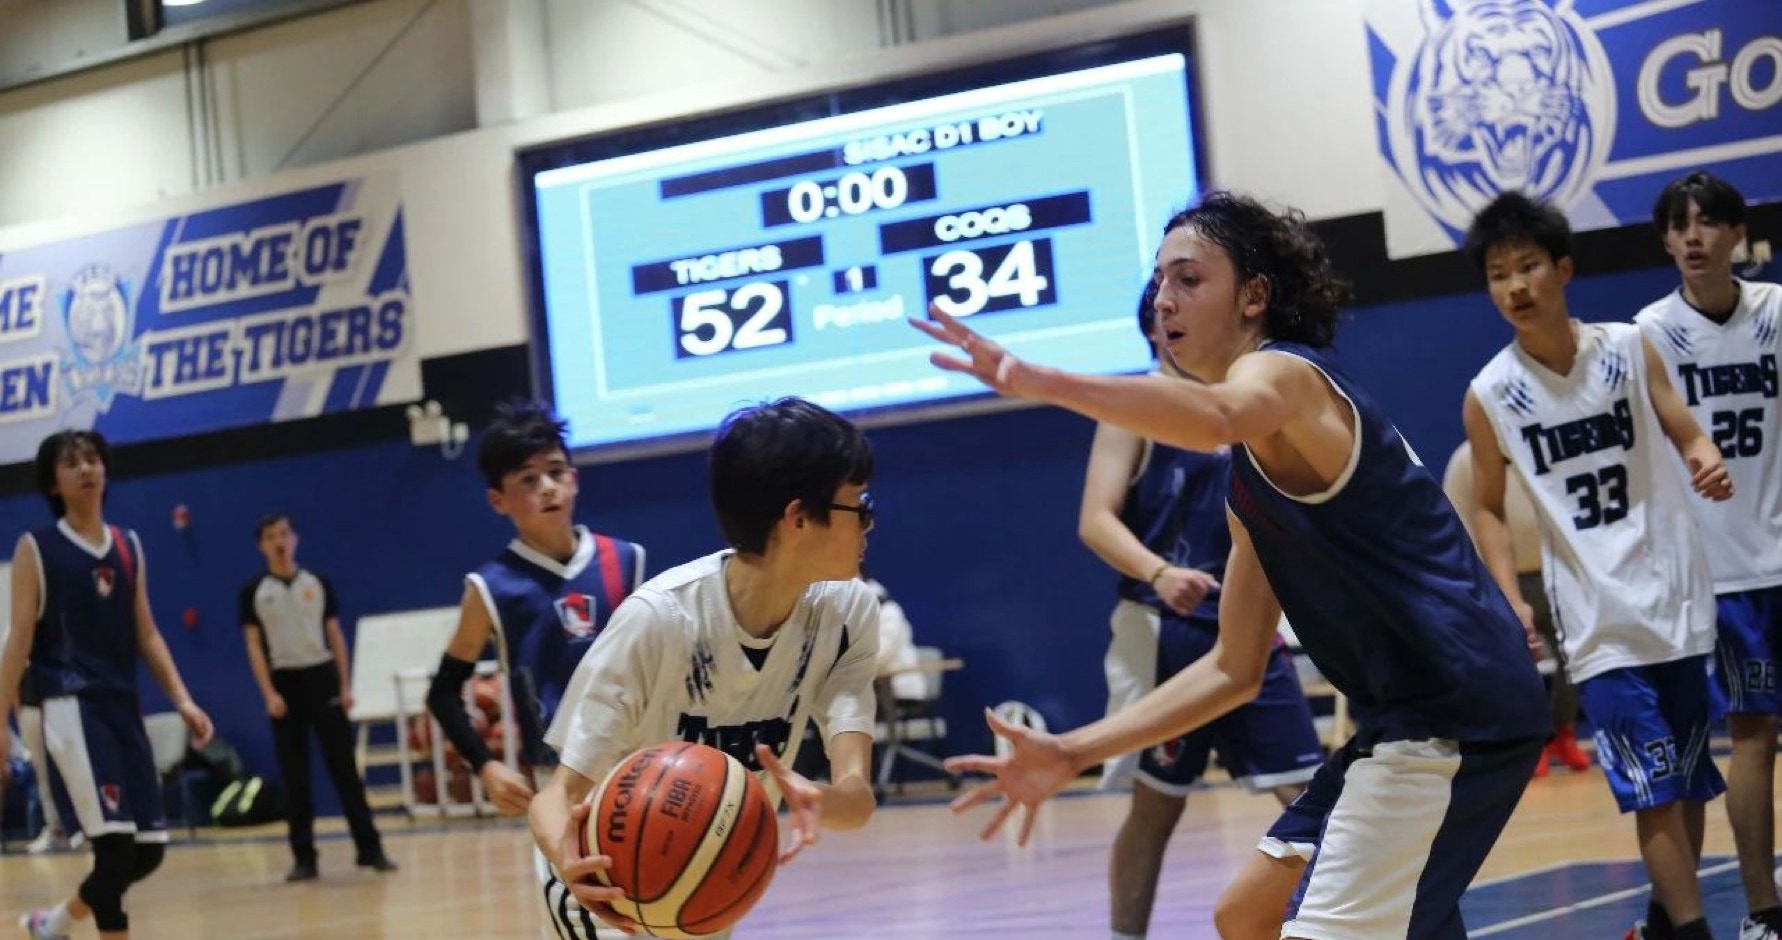 he Western International School of Shanghai (WISS Tigers) recently sparred with the Shanghai French School (LFS Coqs) in an exhilarating high school boys' basketball game. The Tigers emerged triumphant with a final score of 52 to 34, demonstrating their unwavering determination and skill on the court.  From the opening tip-off, it was evident that the LFS Coqs were a formidable opponent. Their tenacity and competitive spirit challenged the Tigers at every turn, forcing them to bring their A-game. The Coqs showcased exceptional ball-handling skills, precision shooting, and effective defensive strategies to keep the Tigers on their toes. They displayed great teamwork and coordination, executing plays with precision and determination. 